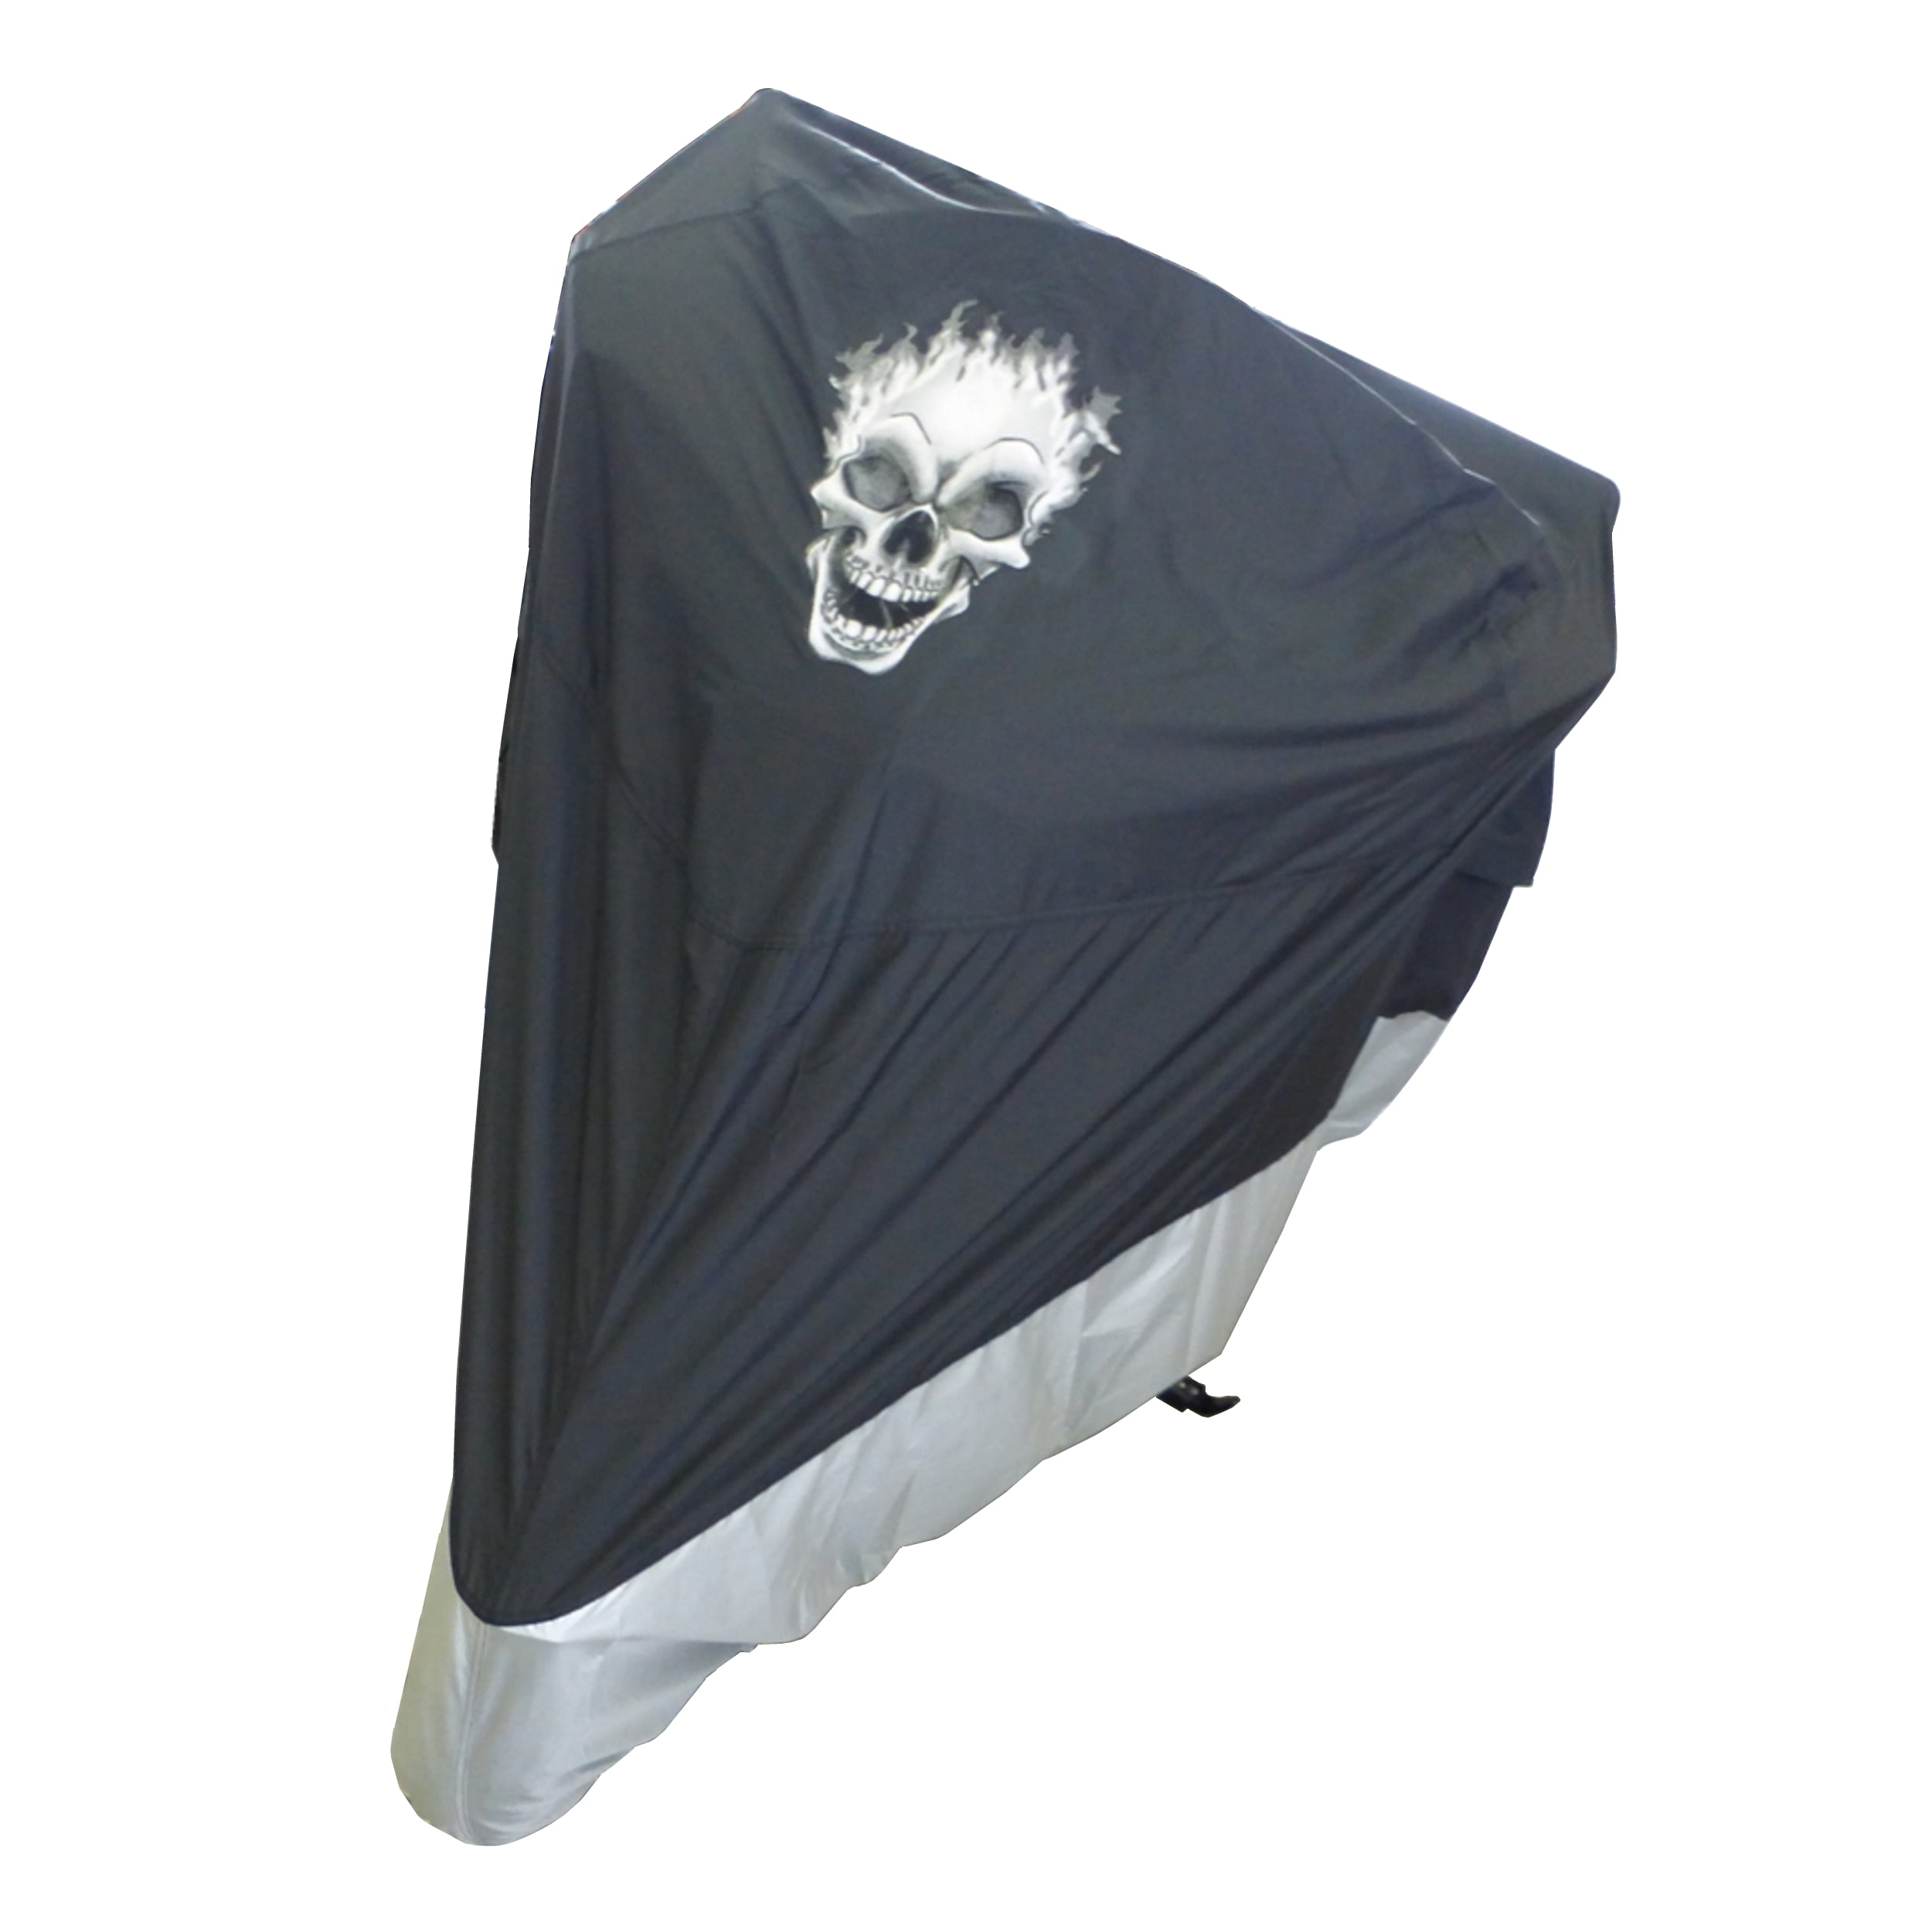 Premium Heavy Duty Motorcycle Cover XXL Includes Cable & Lock Fits up to 108" 